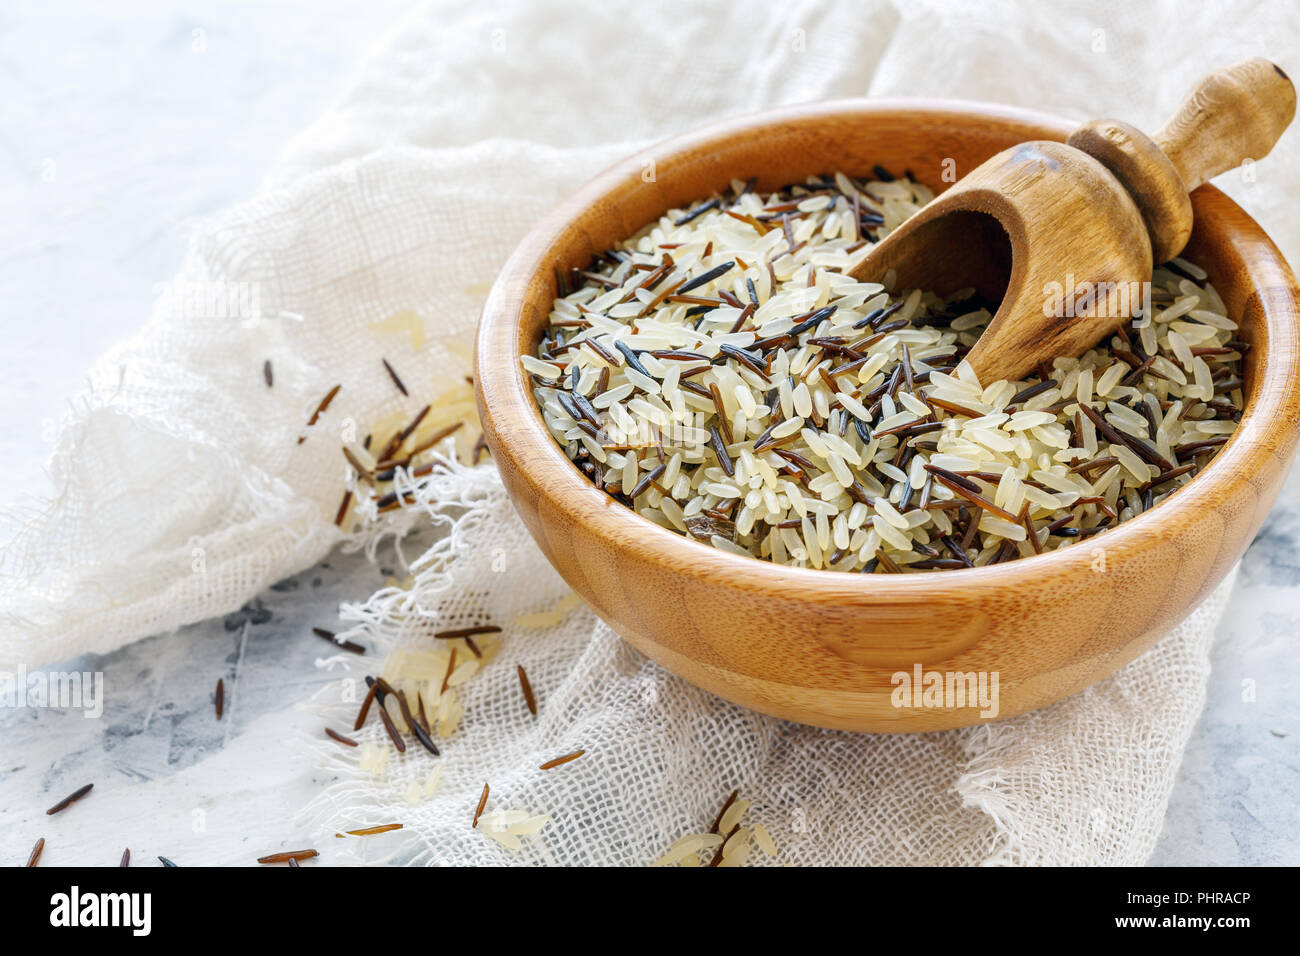 Mixture of white and wild rice in a wooden bowl. Stock Photo